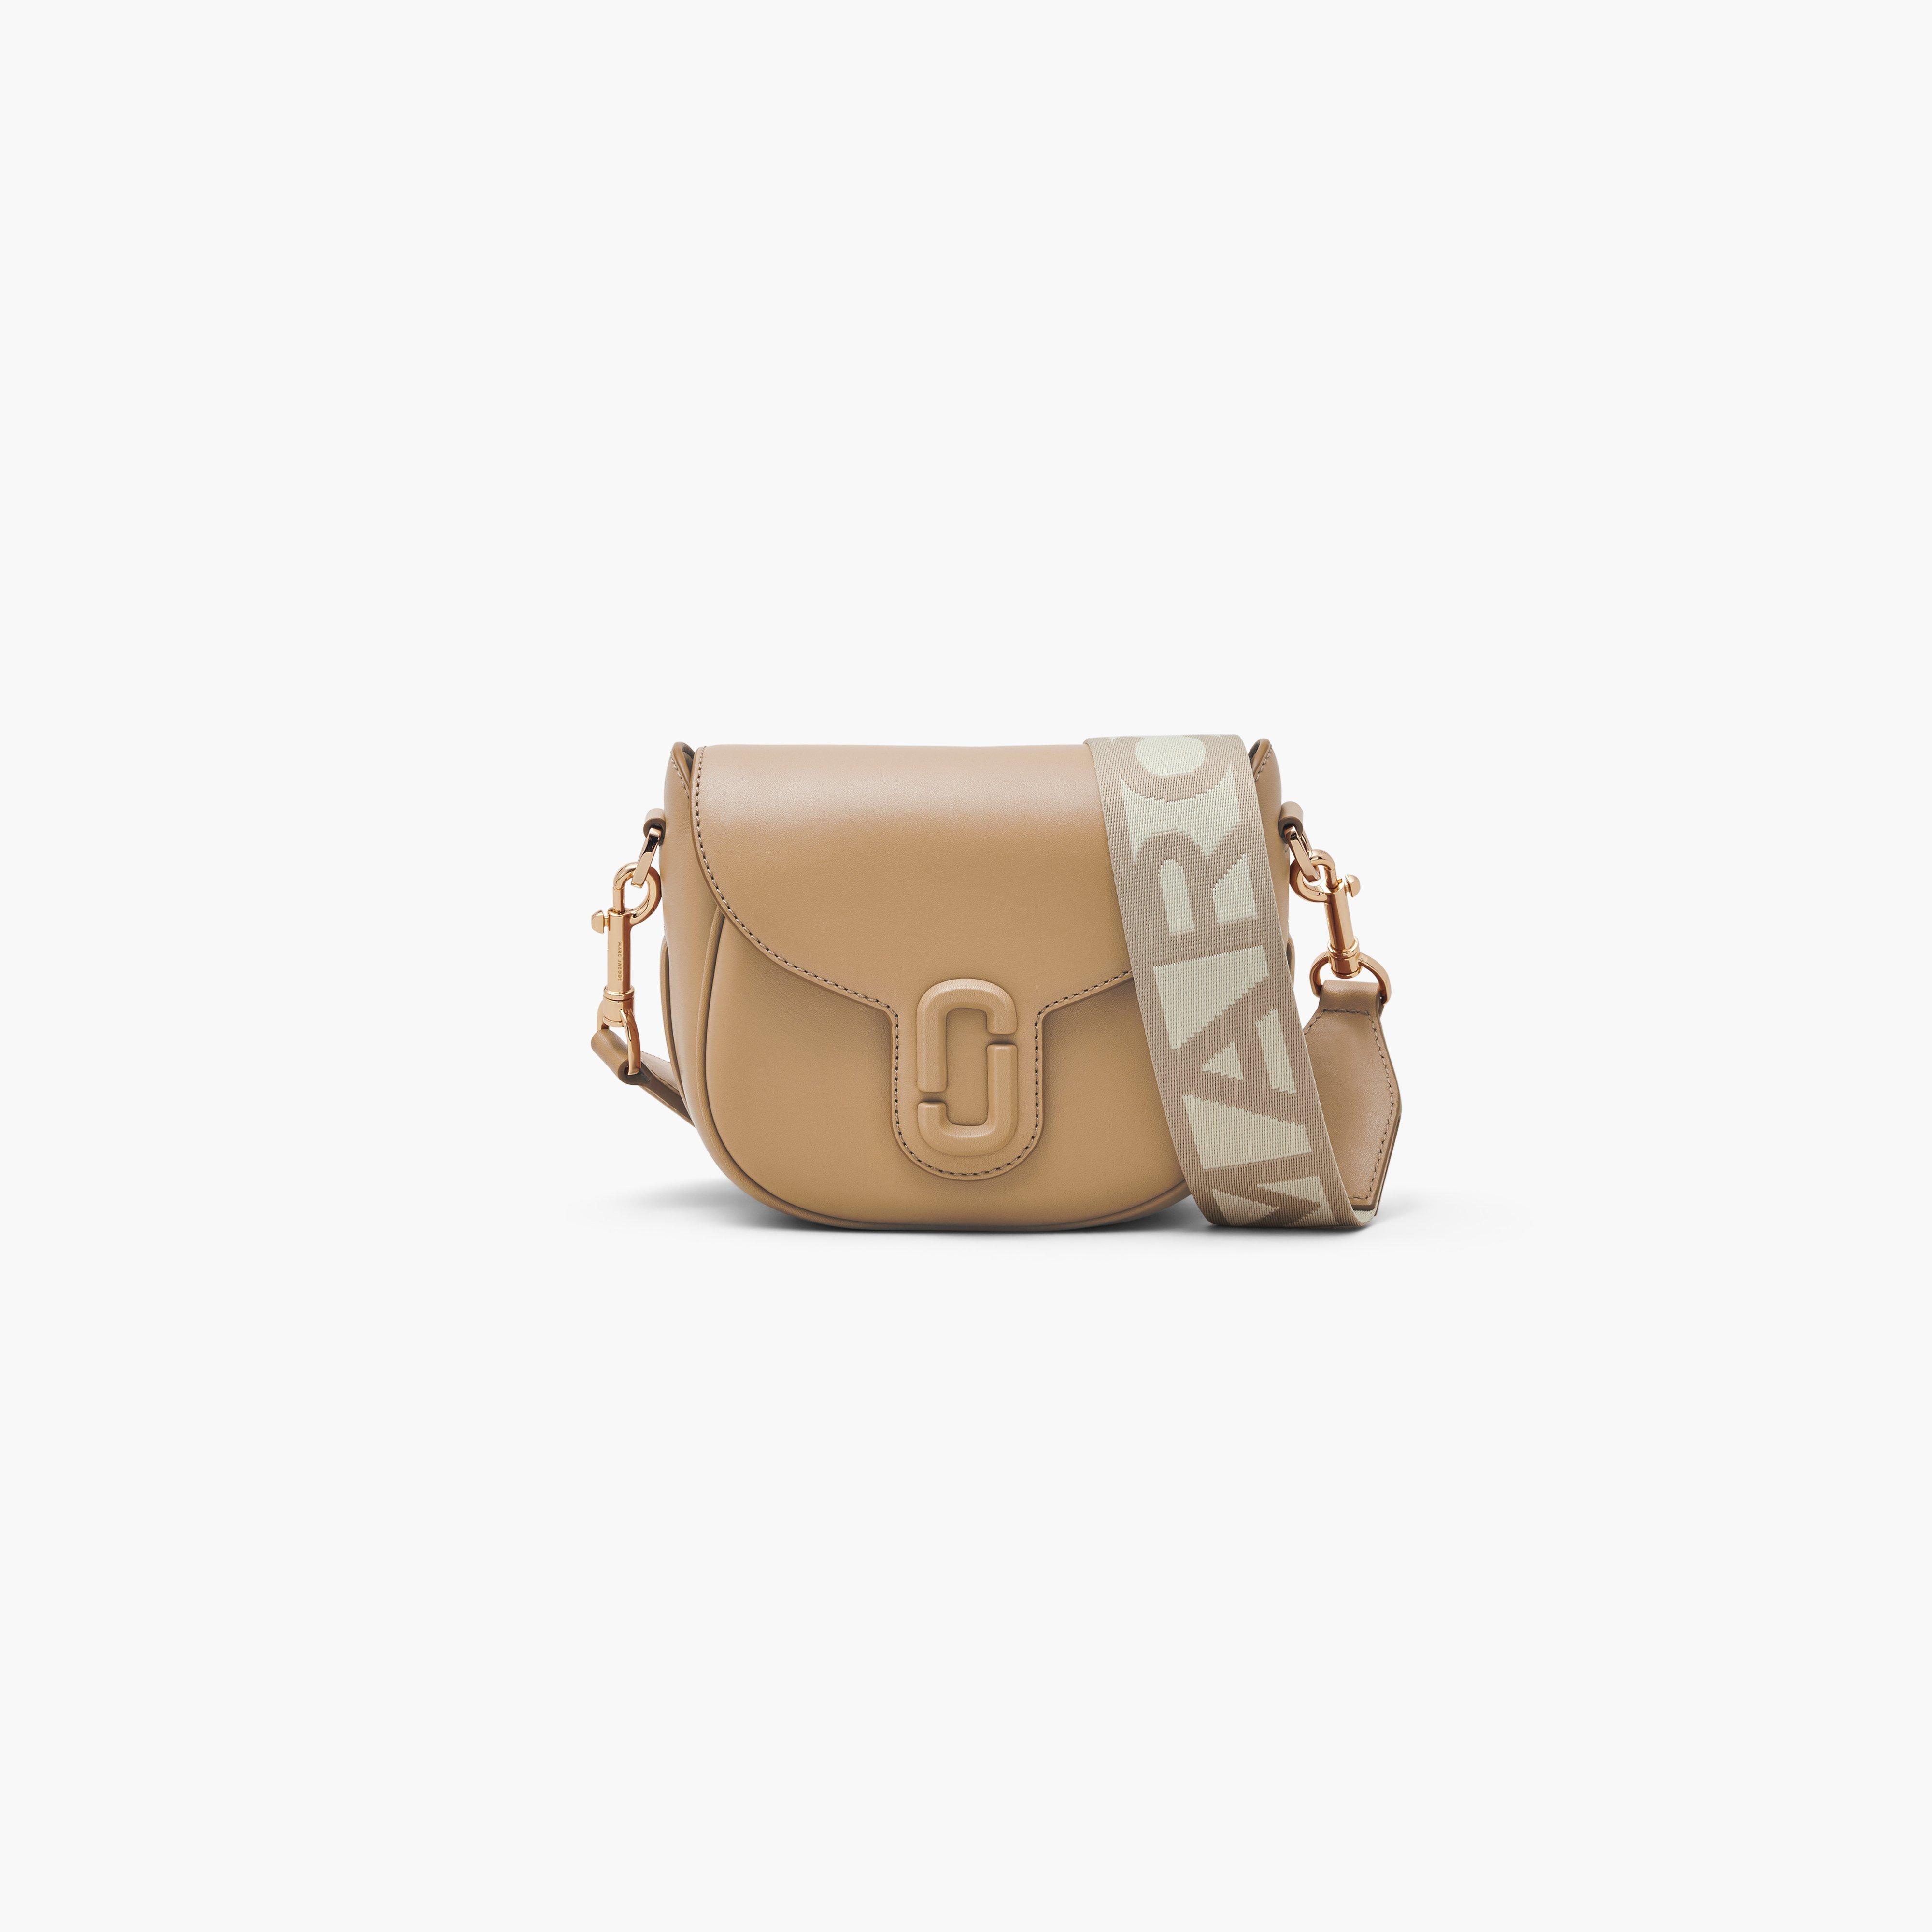 Marc by Marc jacobs The J Marc Small Saddle Bag,CAMEL